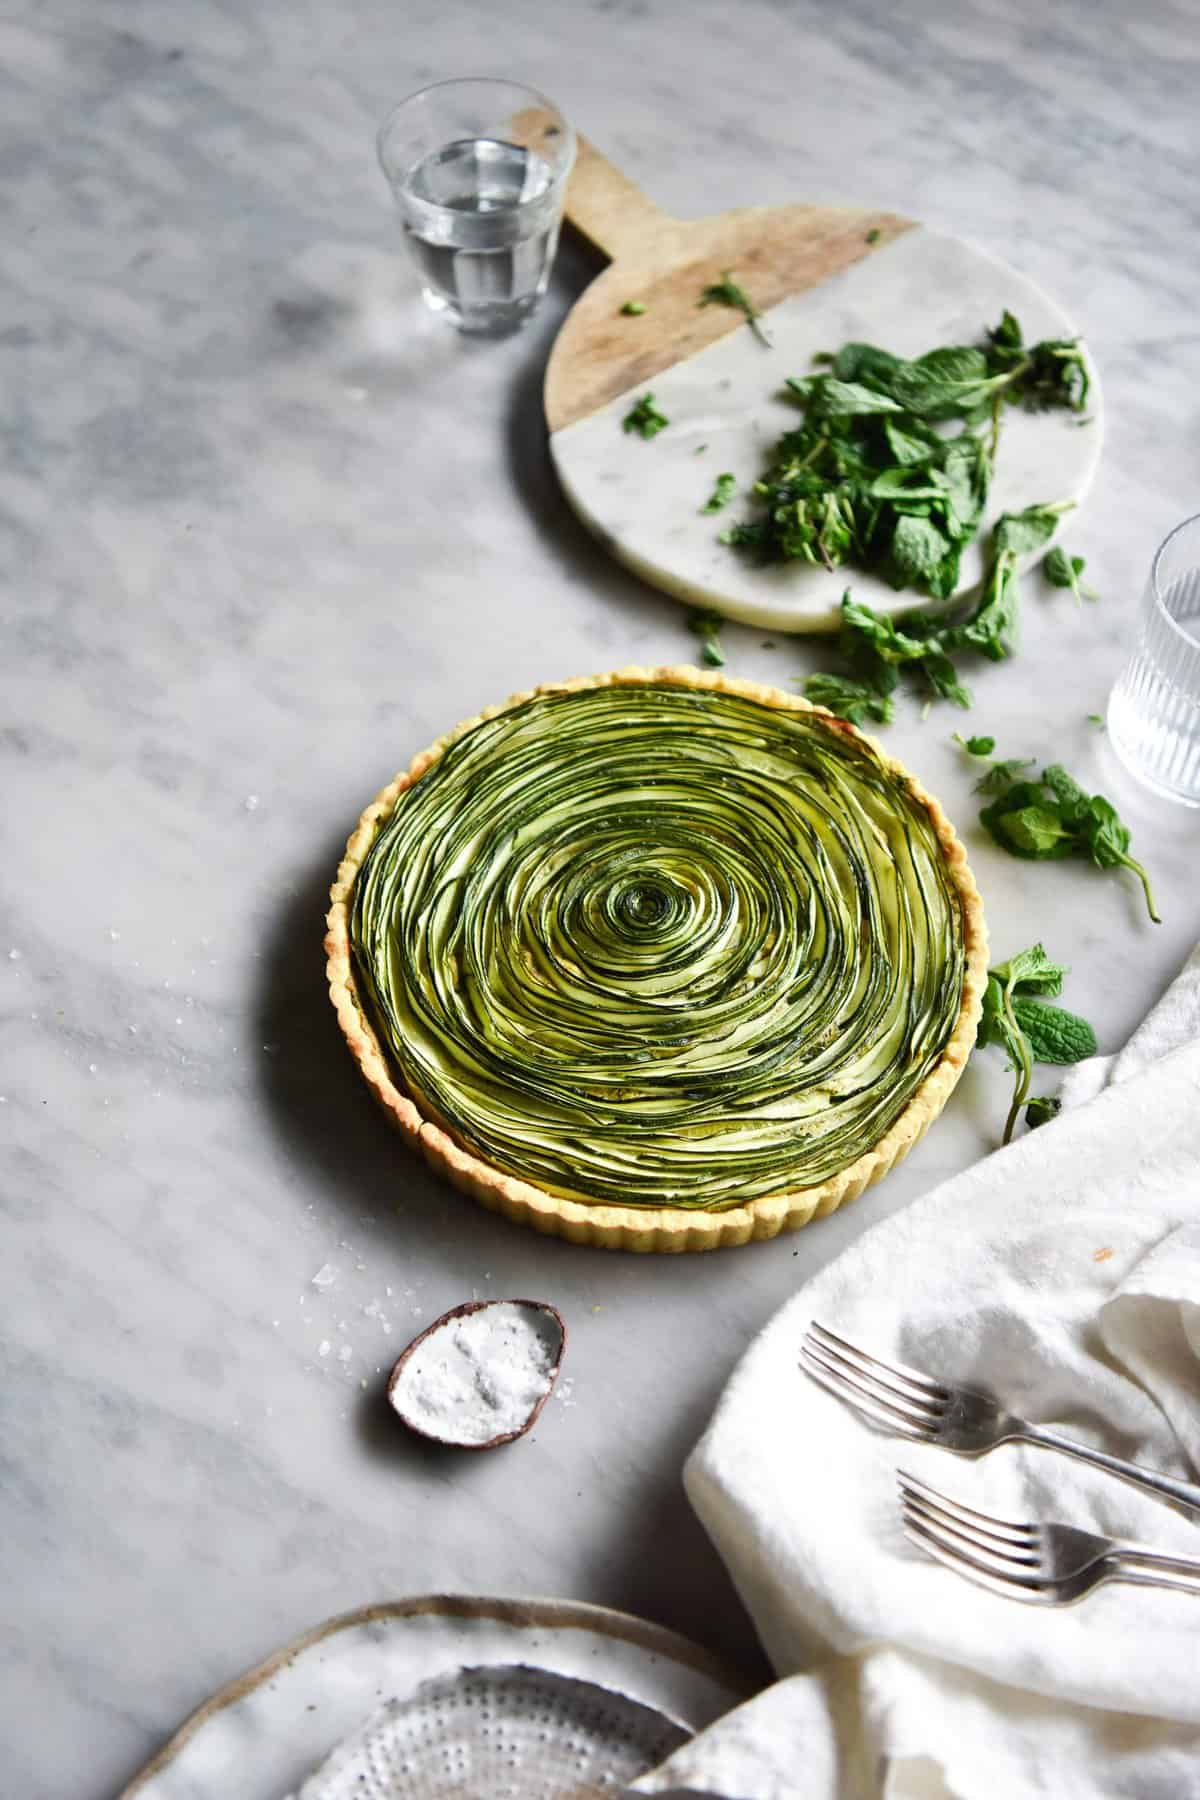 An aerial view of a gluten free zucchini swirl tart on a white marble table. The tart is surrounded by white plates, linen and extra chopped mint.